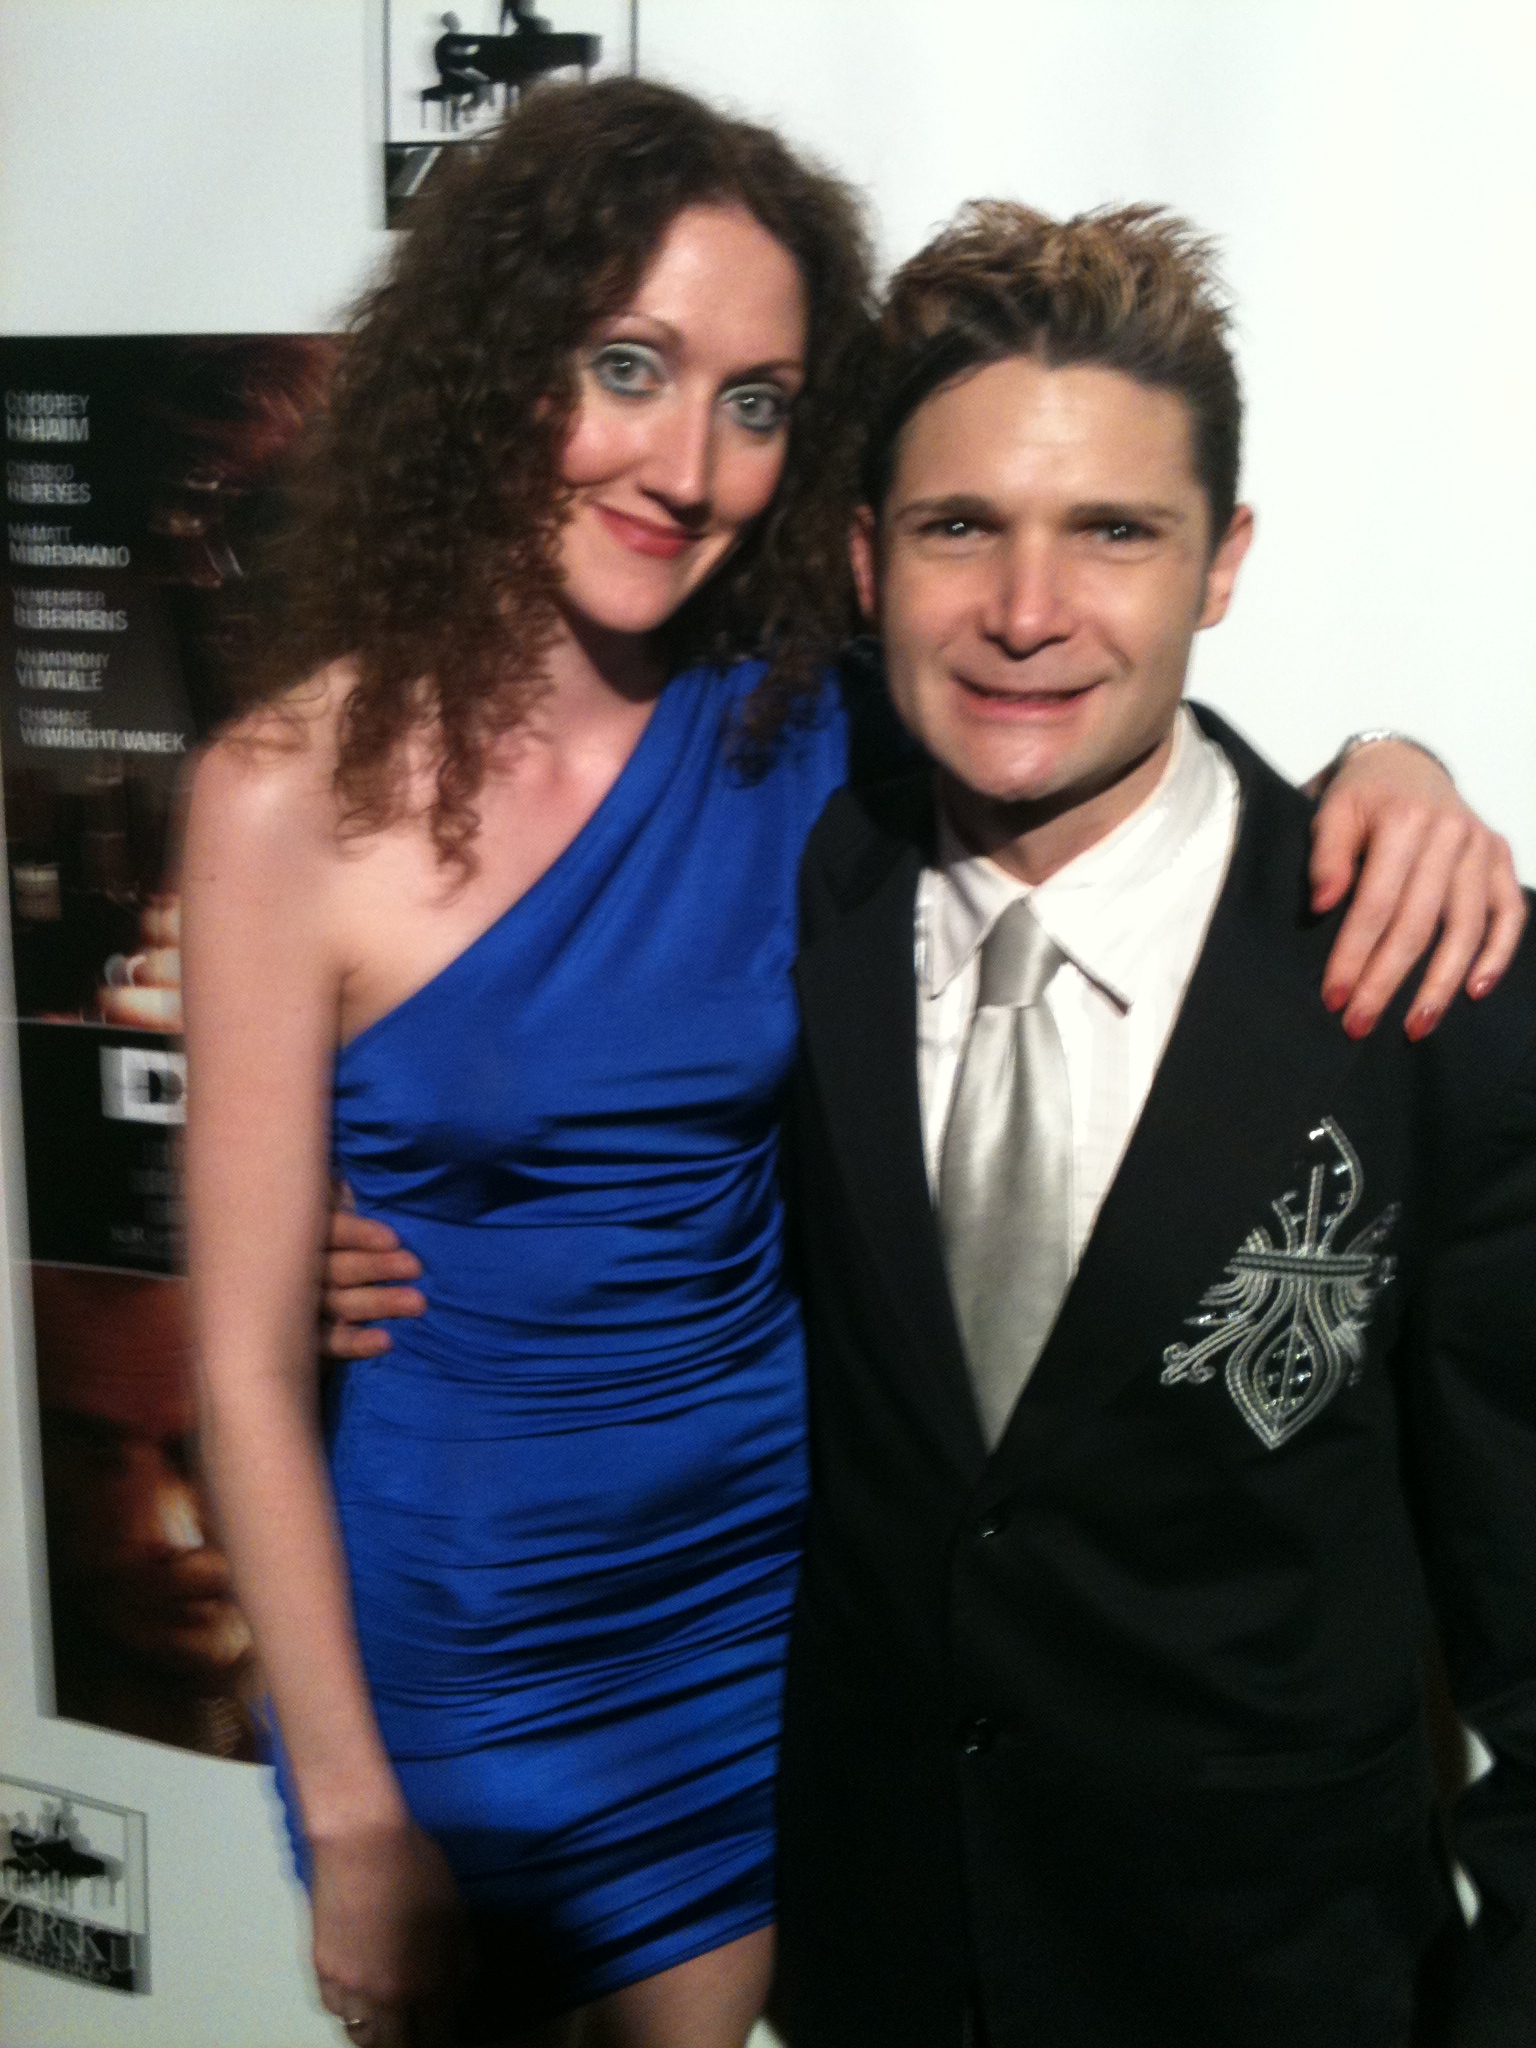 Charlotte Milchard and Corey Feldman on the red carpet at the 